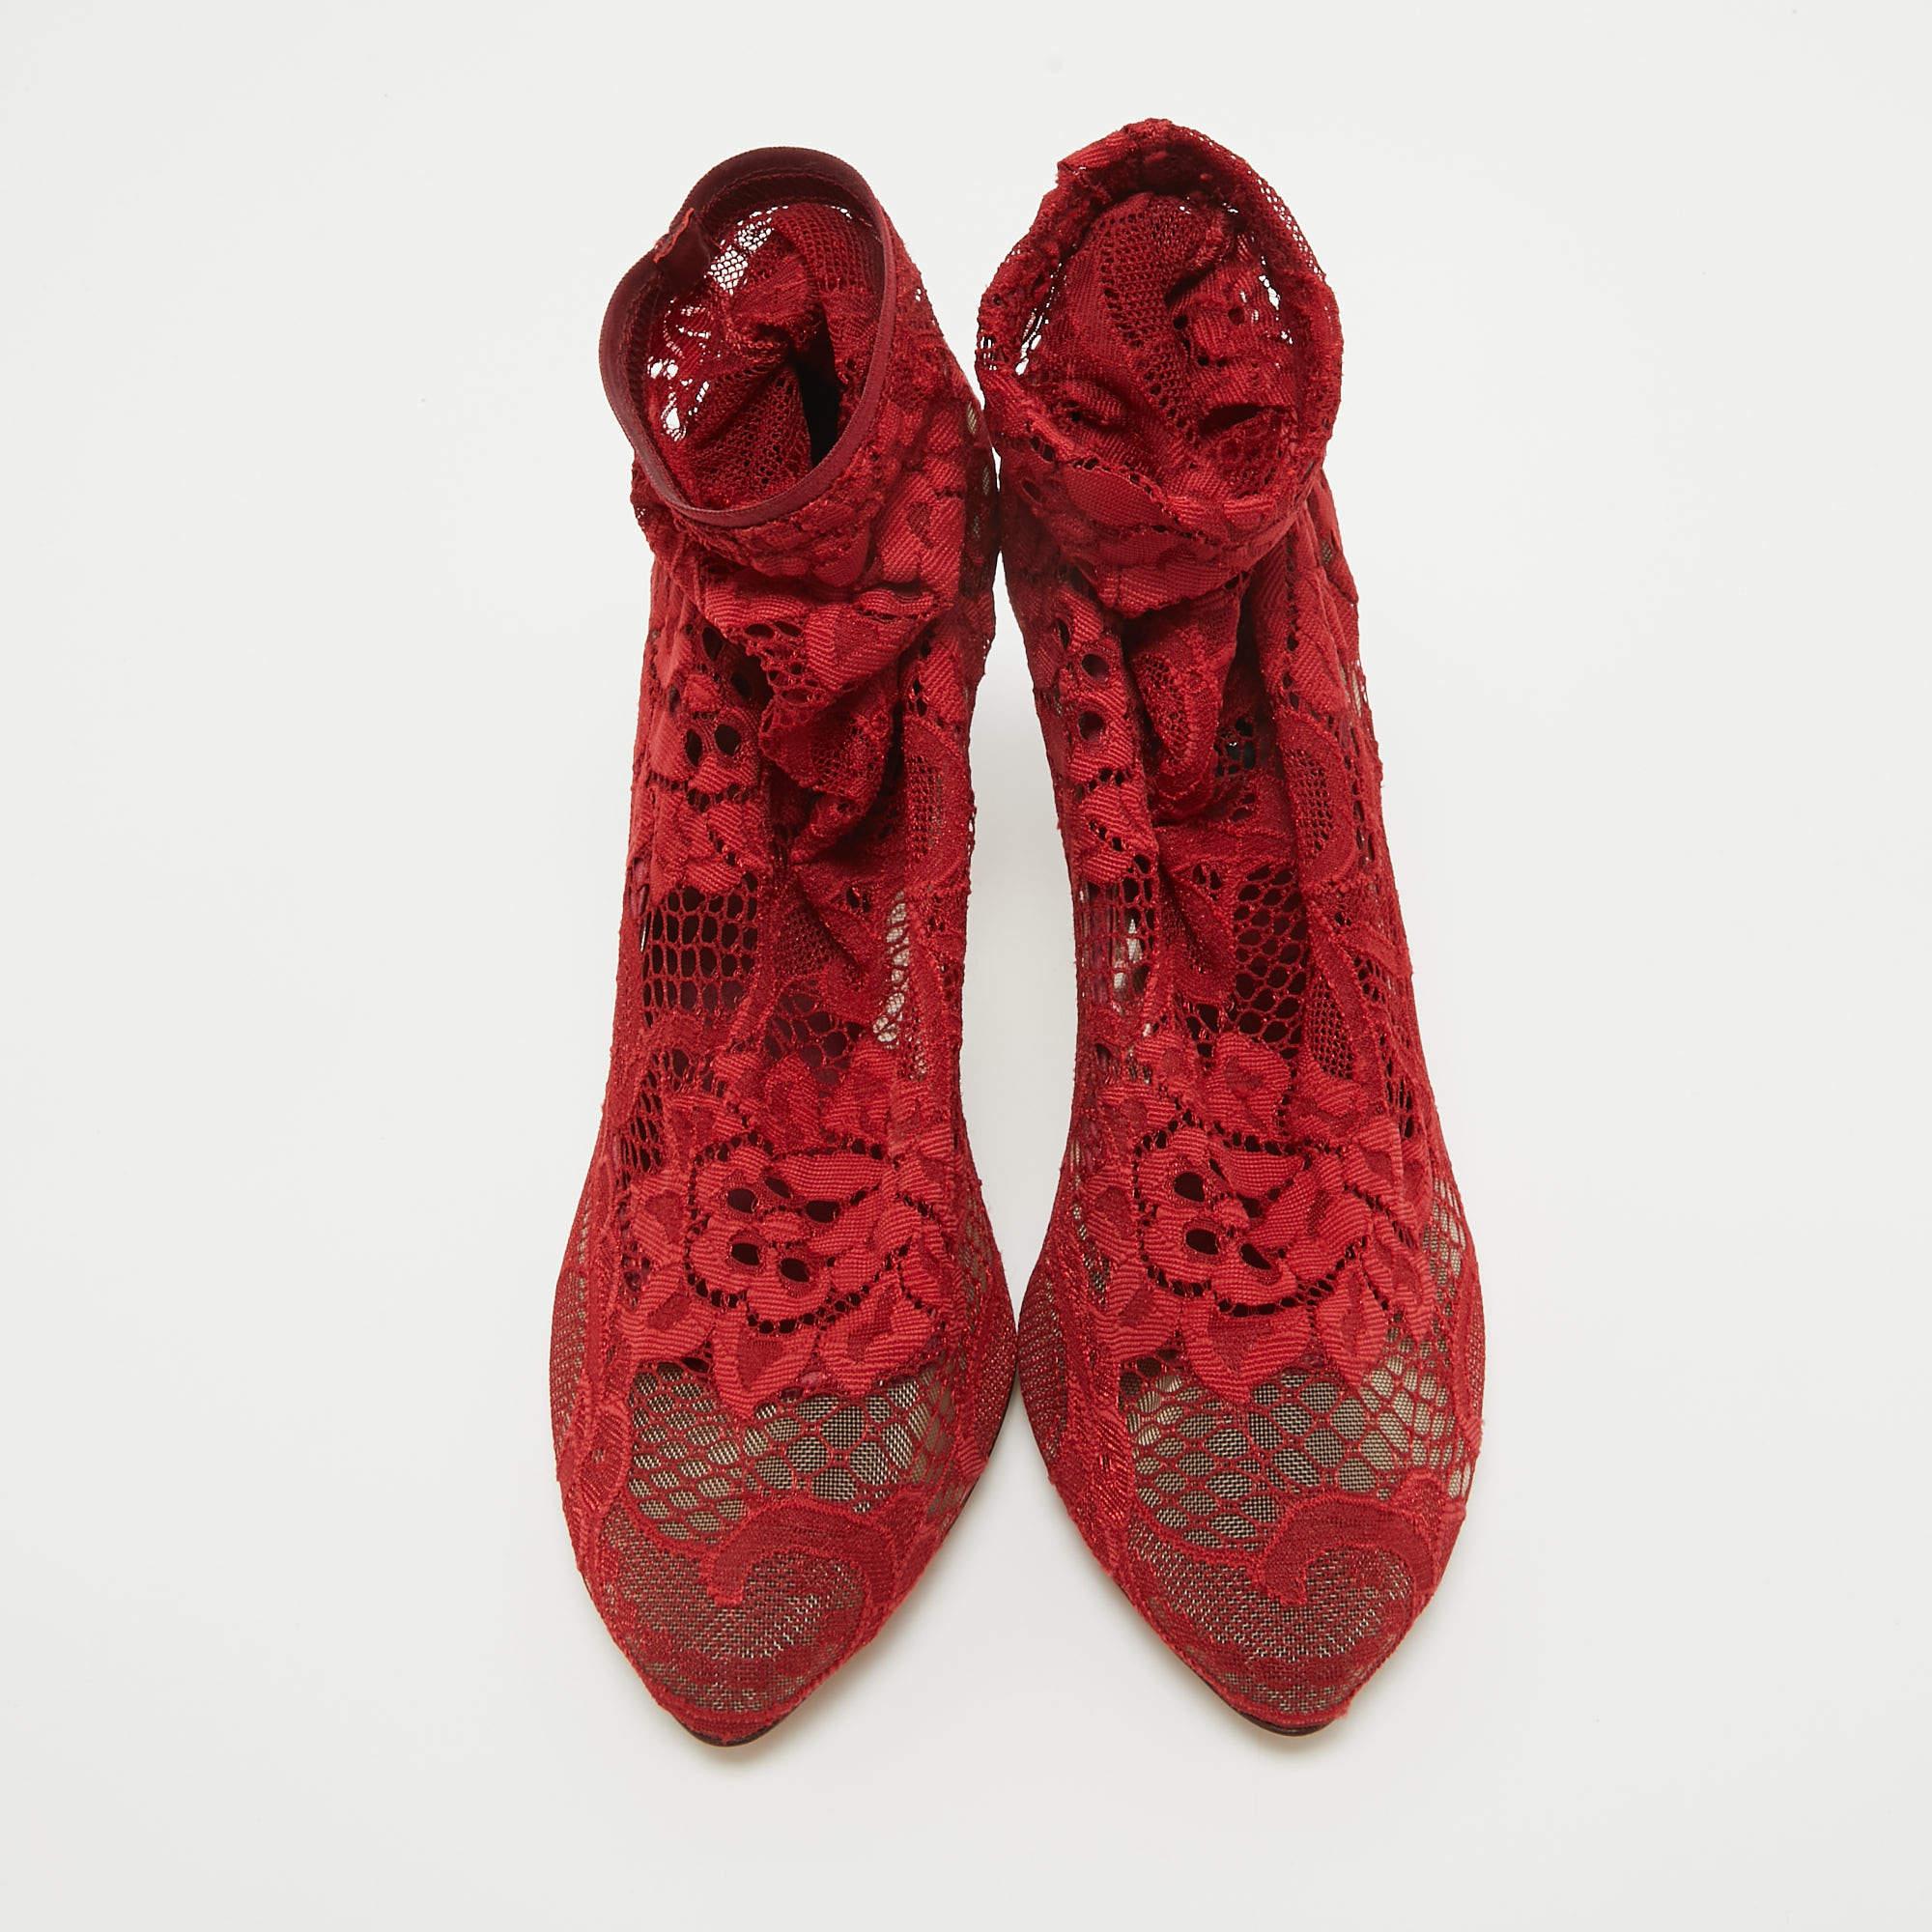 Impeccably crafted into a super-stylish silhouette, these ankle booties from the house of Dolce & Gabbana will help you create a stunning style statement. They are crafted from intricate lace detailing. With an elegant silhouette, the red booties